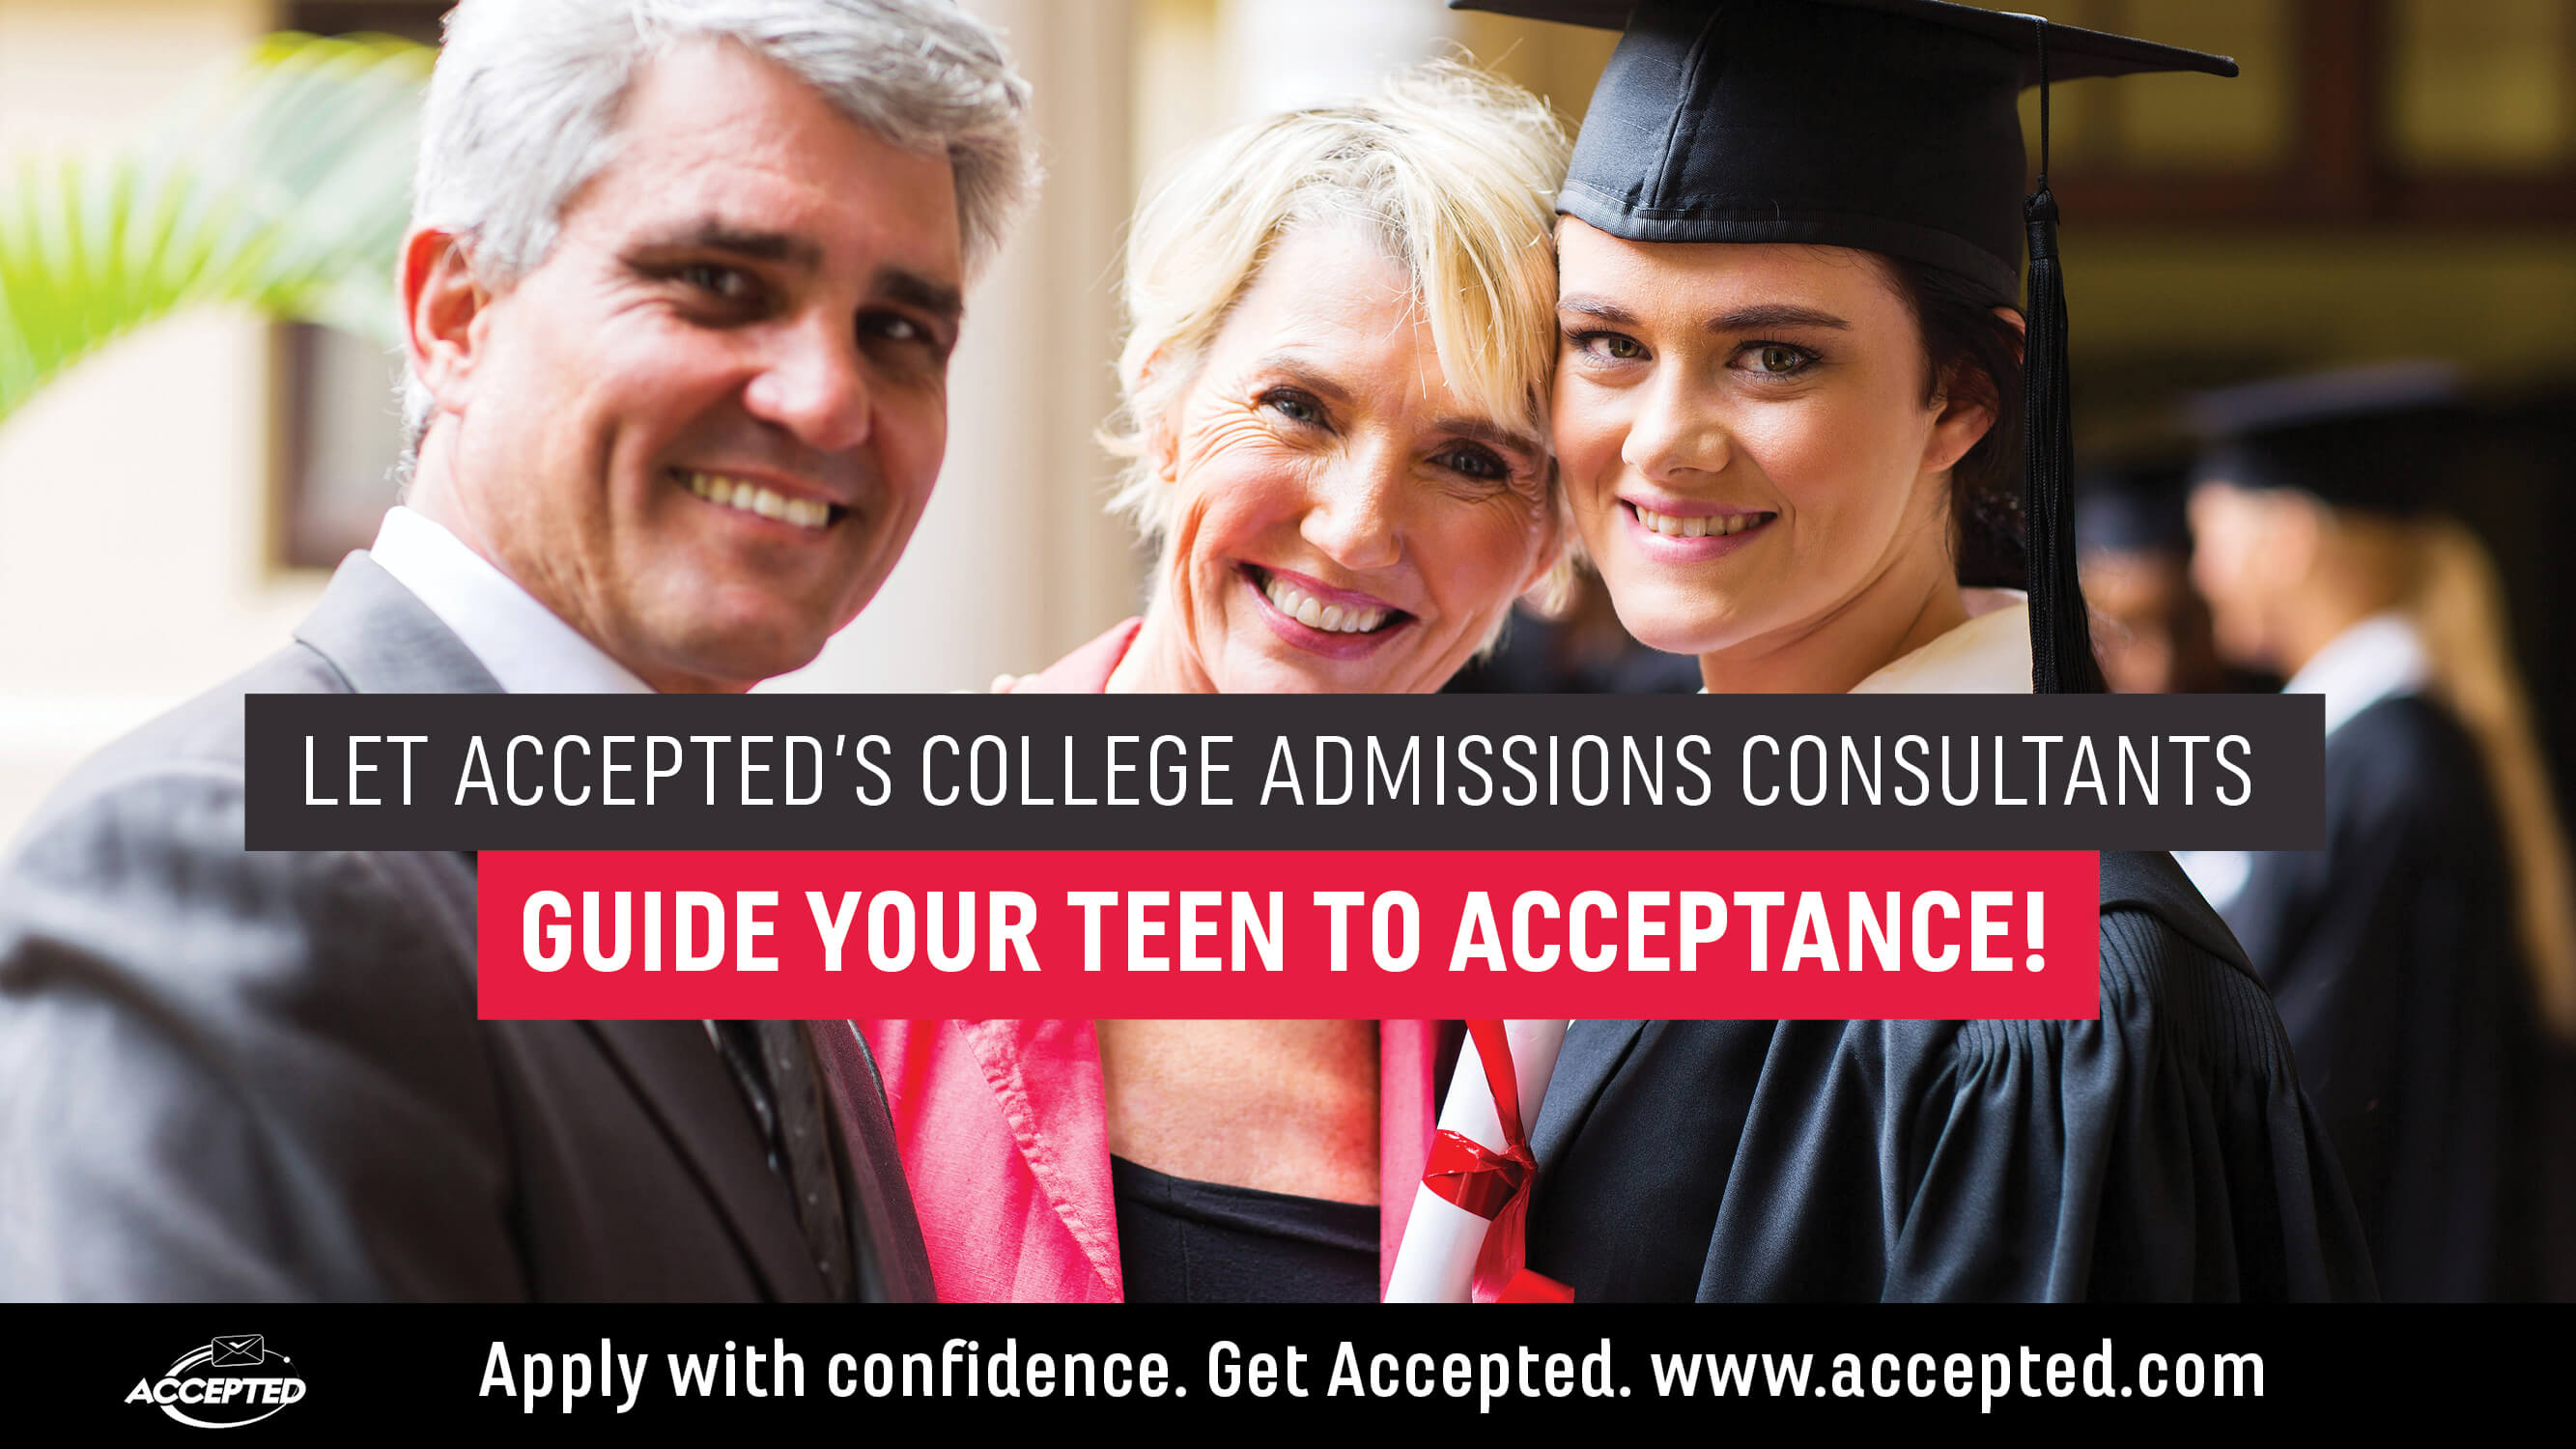 Let Accepted’s College Admissions Consultants Guide Your Teen to Acceptance